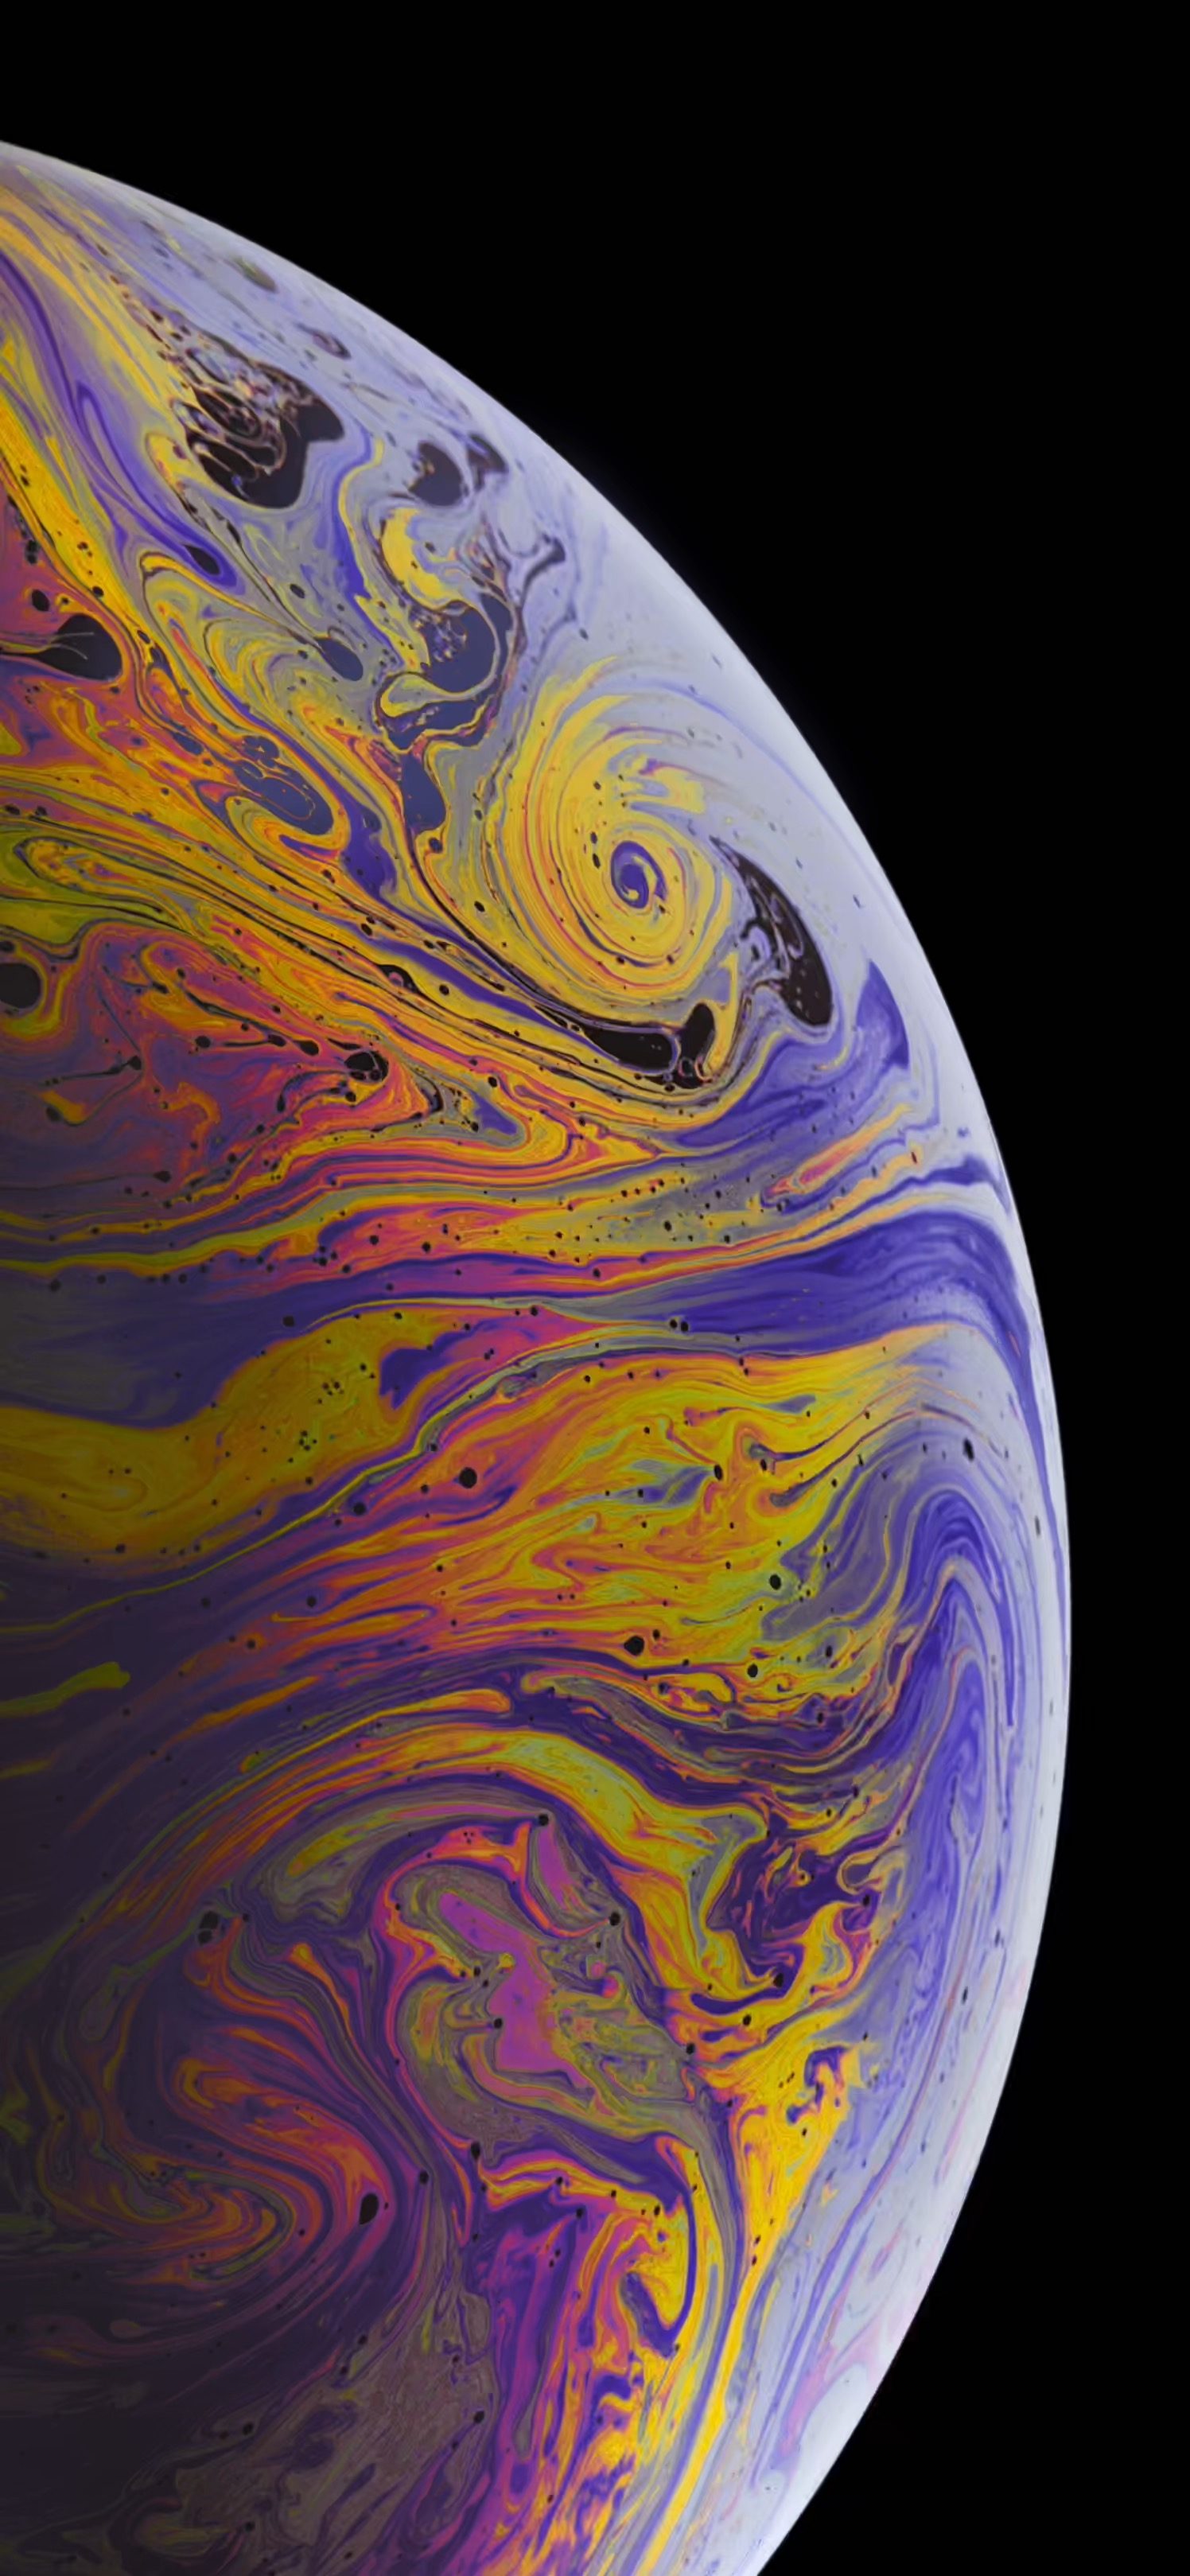 Download All New iPhone Xs, Xs Max, Xr Wallpapers & Live ...